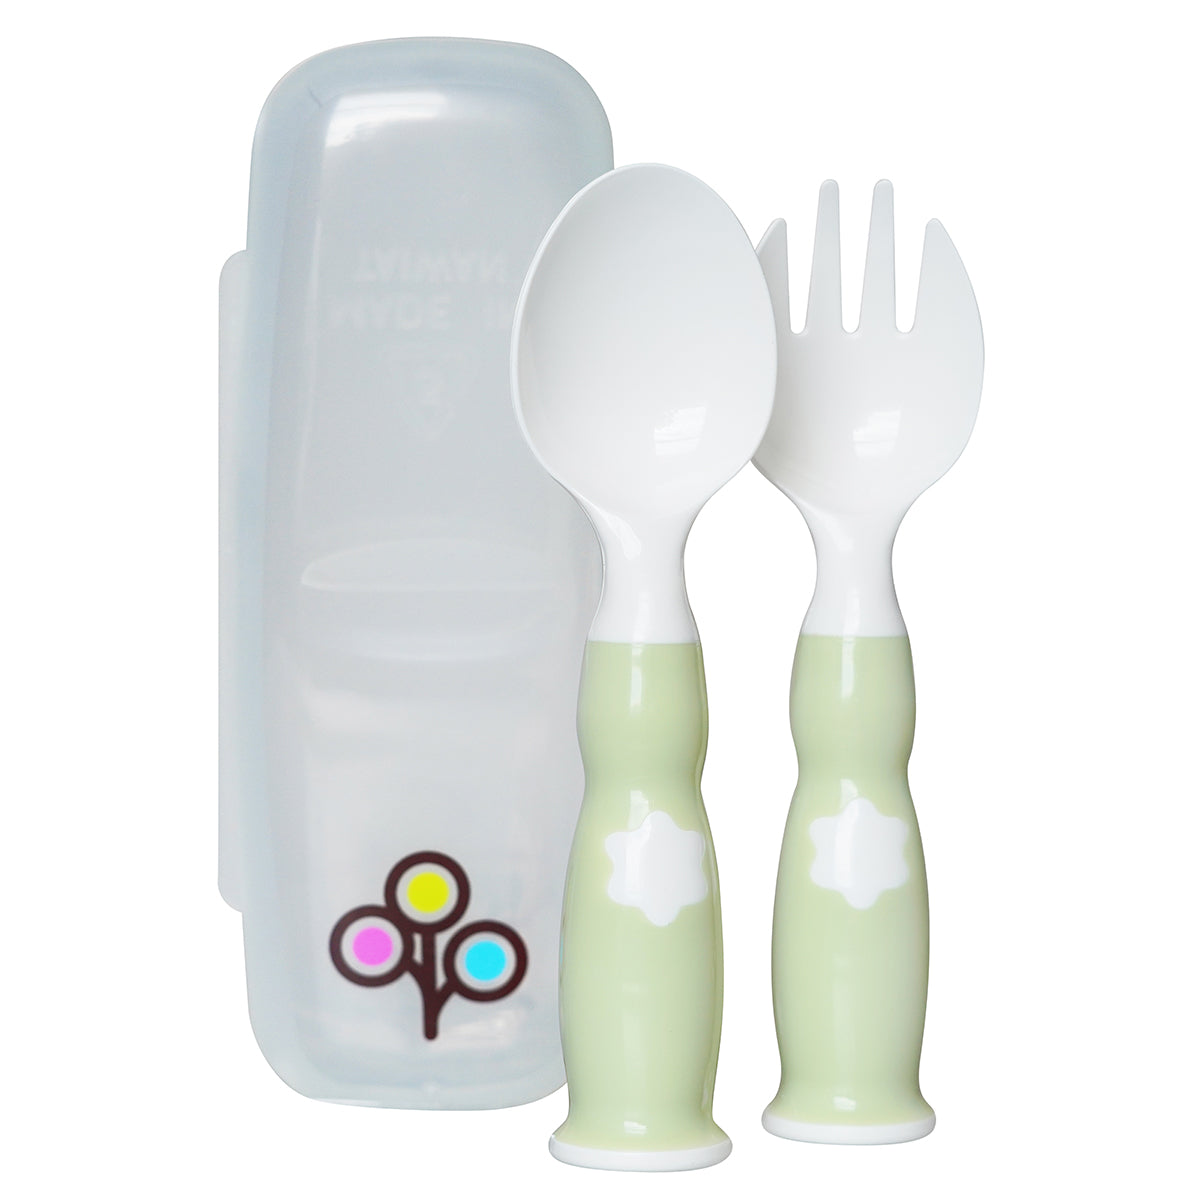 Infant Self Baby and Toddler Self-Feeding Utensils Spoon and Fork